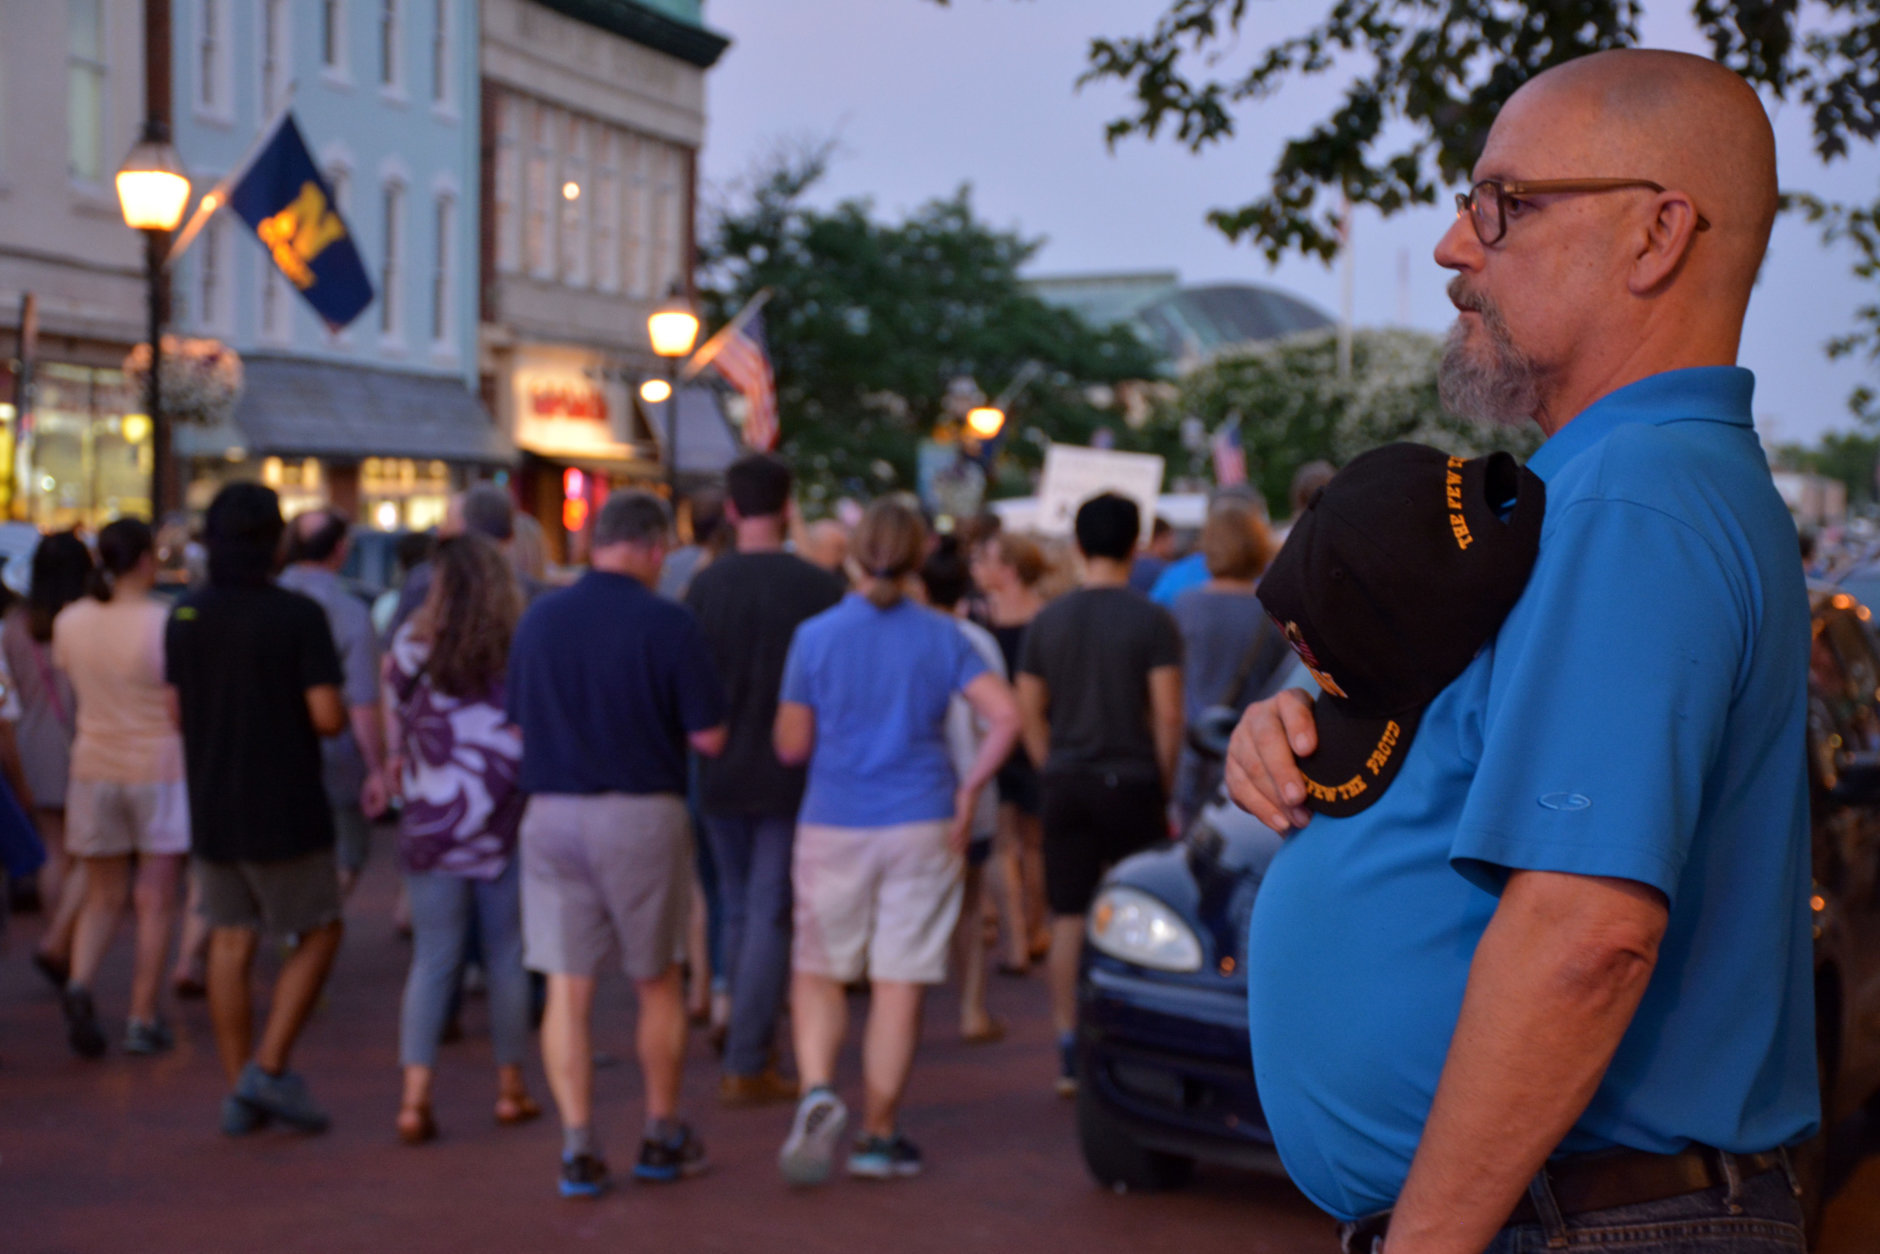 Supporters hold signs Friday night at a candlelight vigil in downtown Annapolis for victims murdered in a shooting at the Capital Gazette in Annapolis, Maryland. (Courtesy/Bethany Swain)